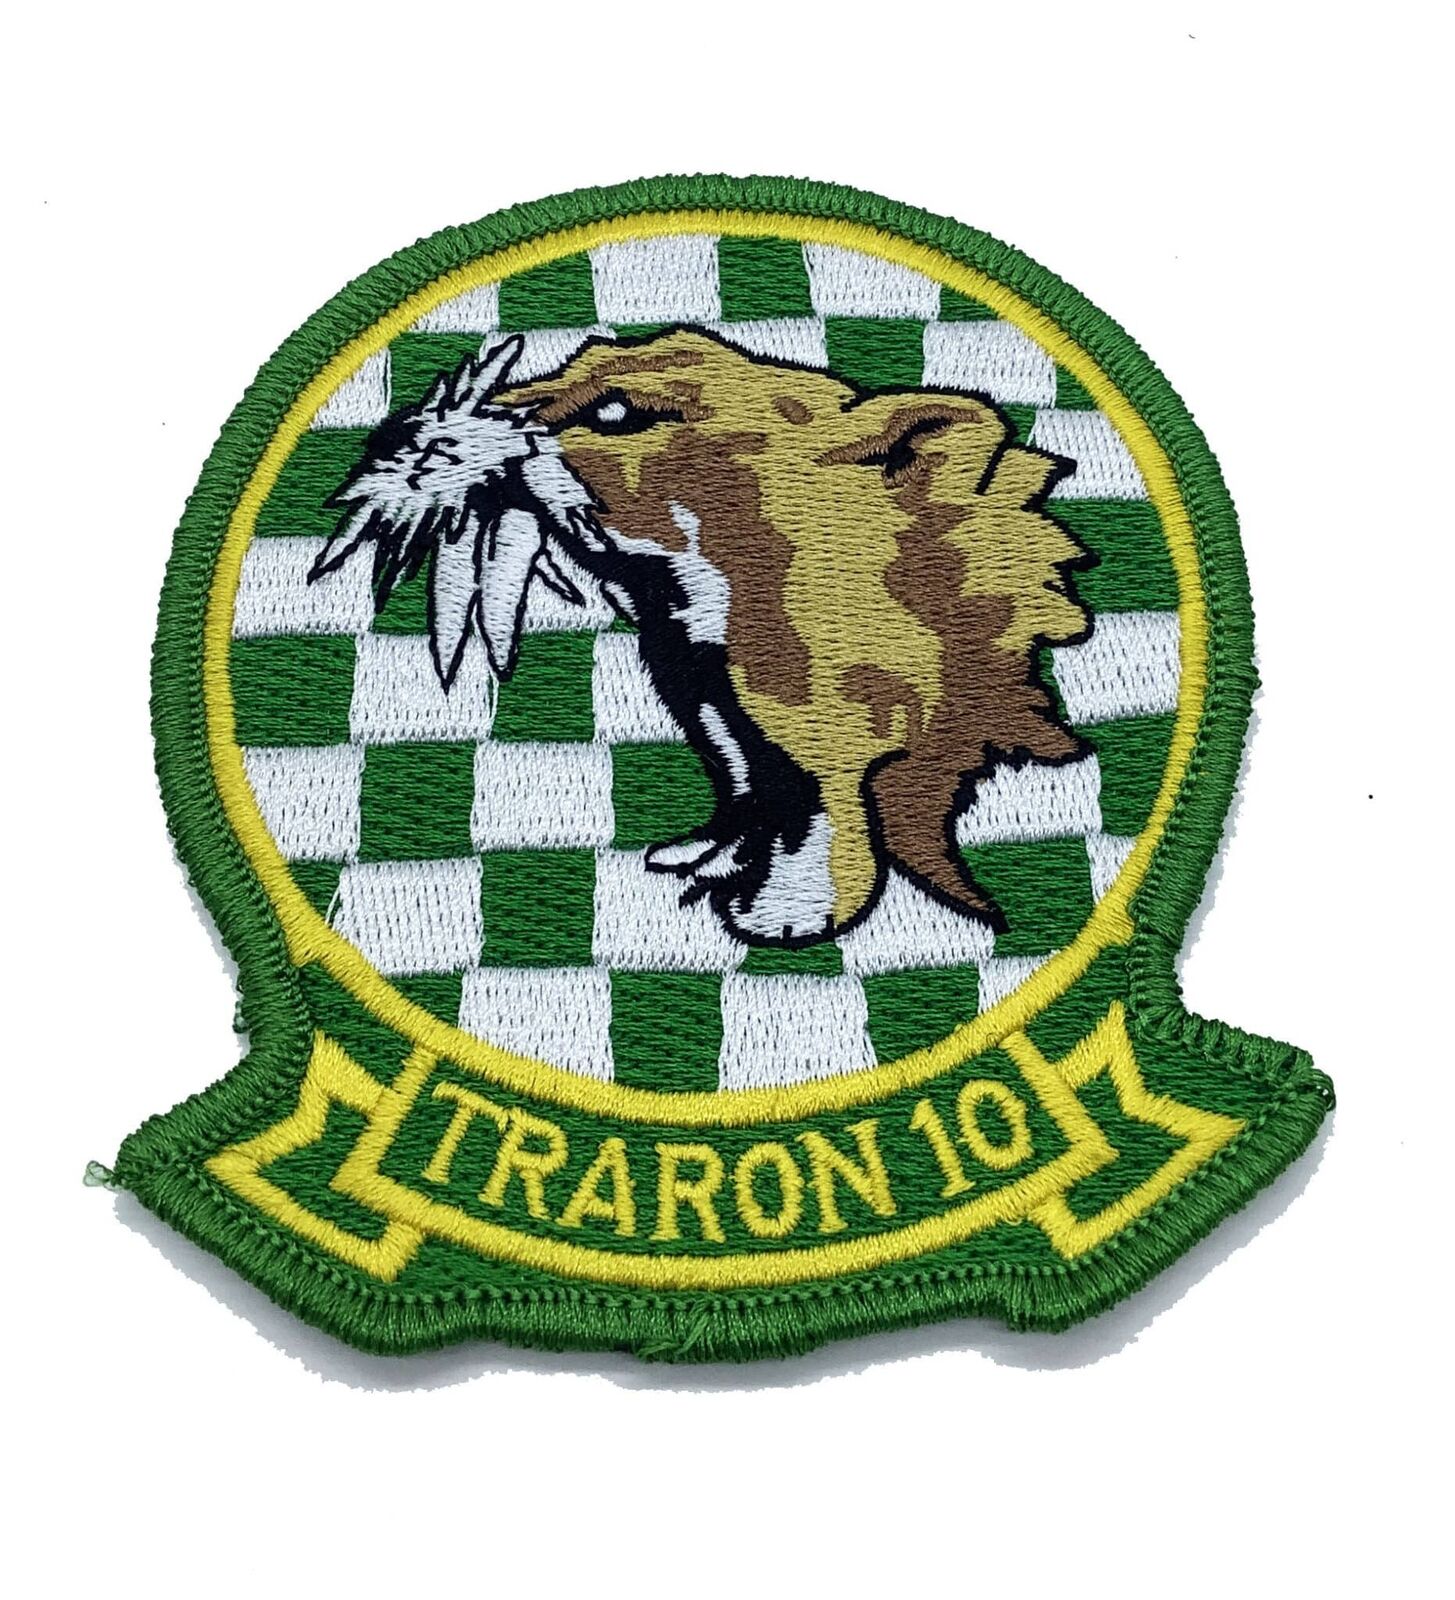 VT-10 Wildcats Patch – Plastic Backing